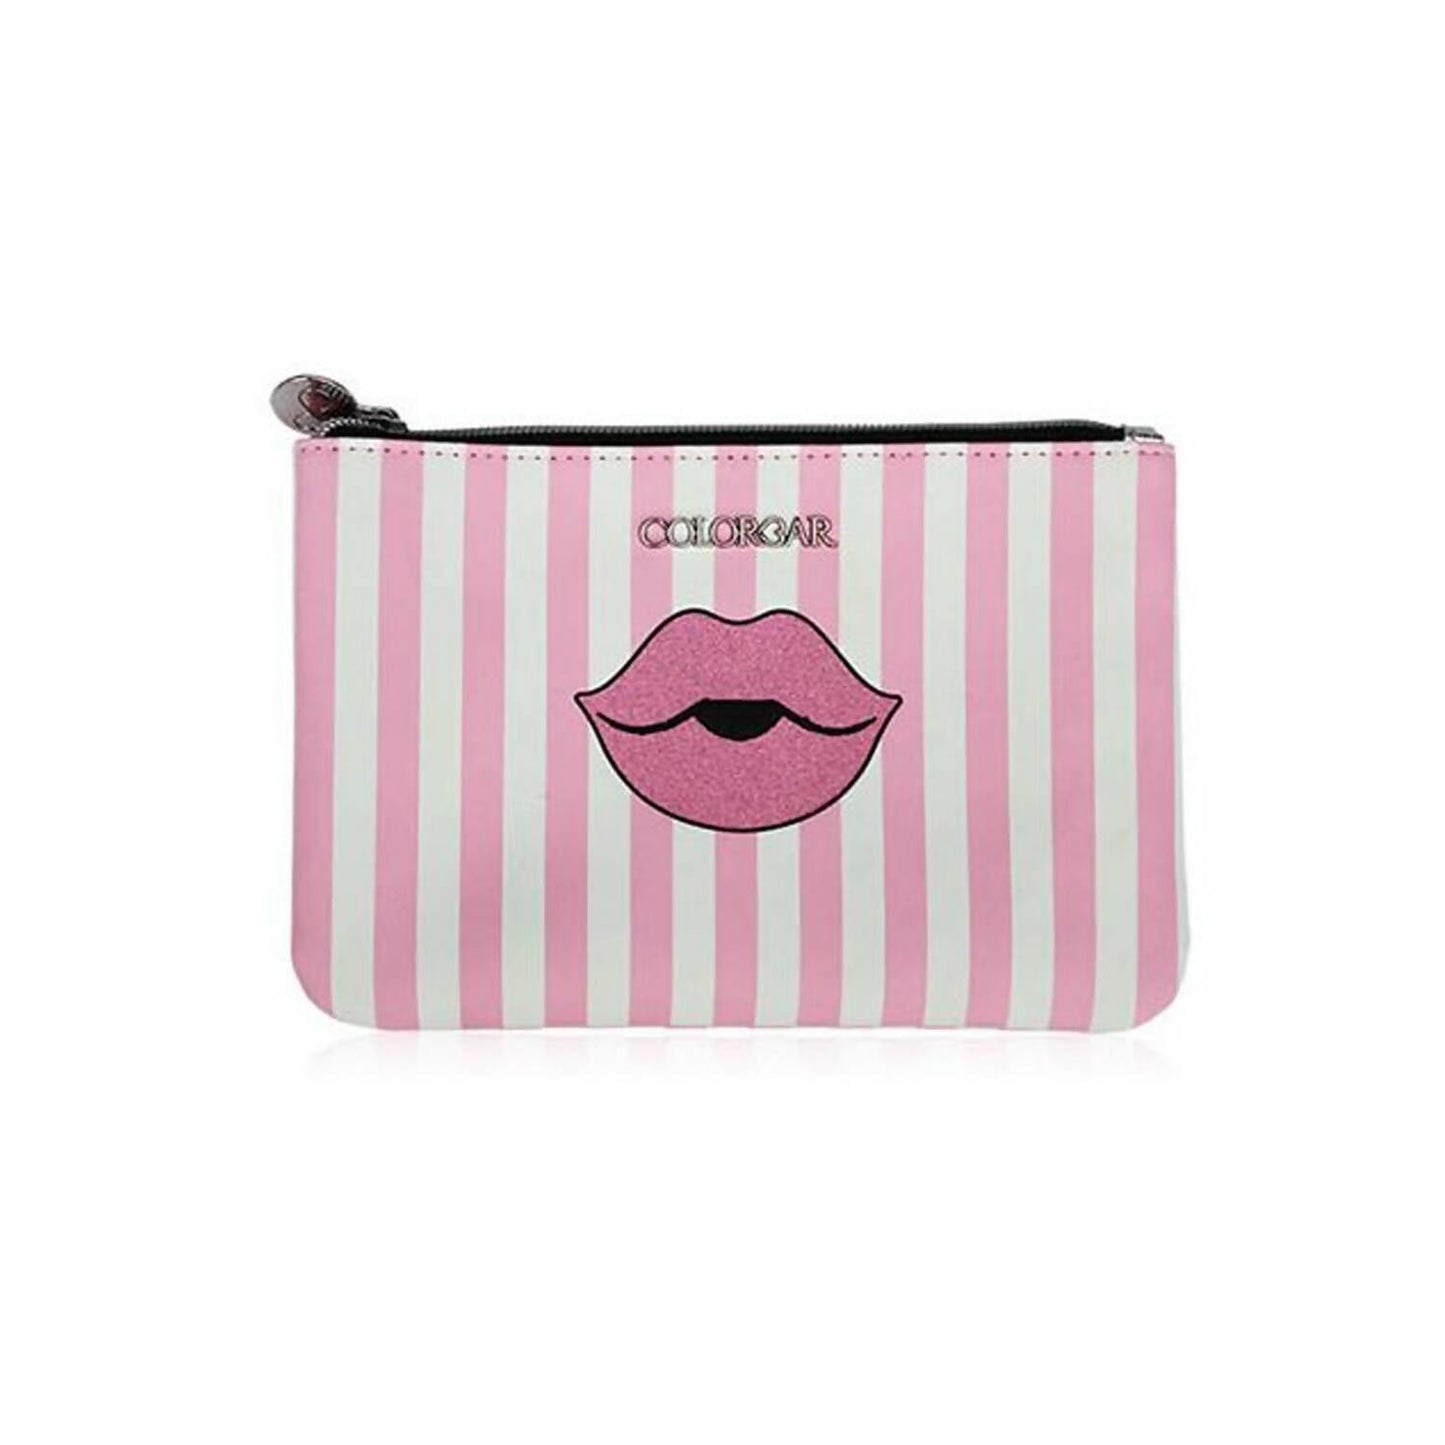 Colorbar Pouch Lips & Lashes Flat Pouches (Set Of Two) - White+Blush Pink